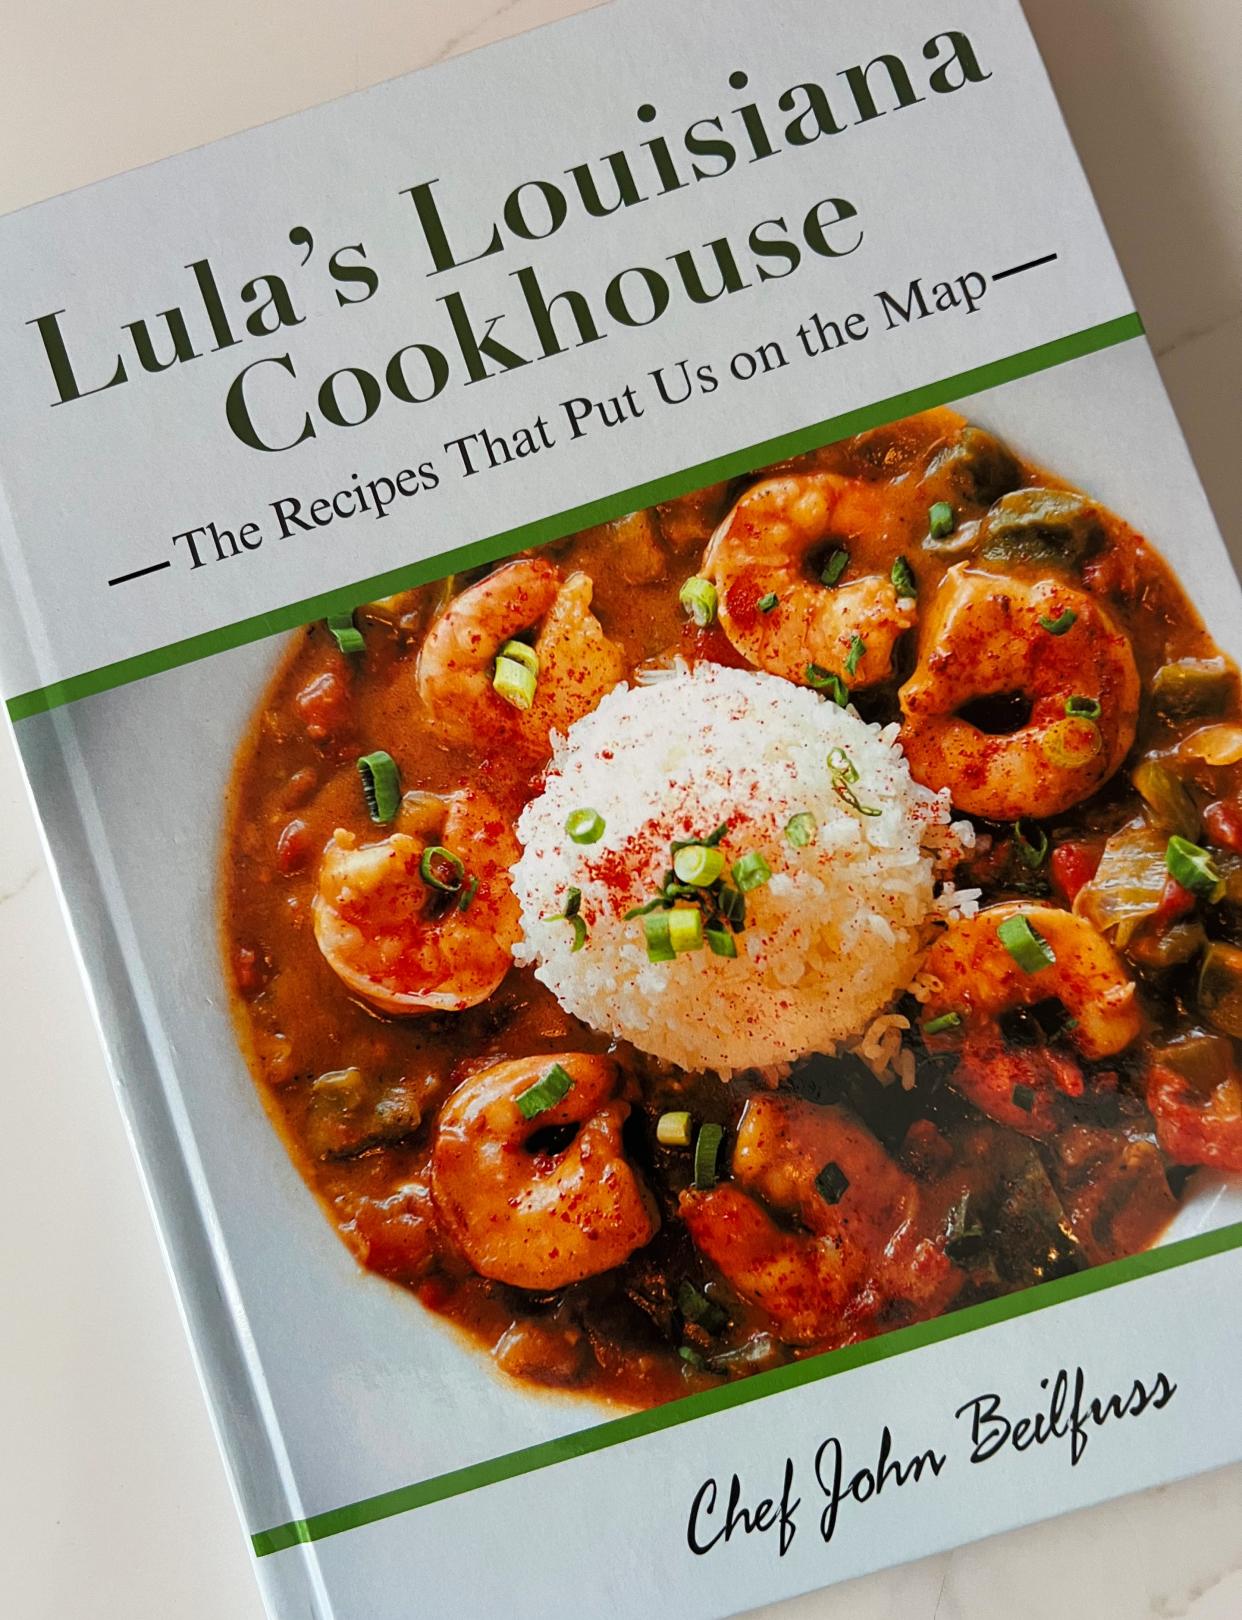 Owosso resident and chef John Beilfuss self-published his "Lula’s Louisiana Cookhouse" cookbook on Jan. 3, 2023.